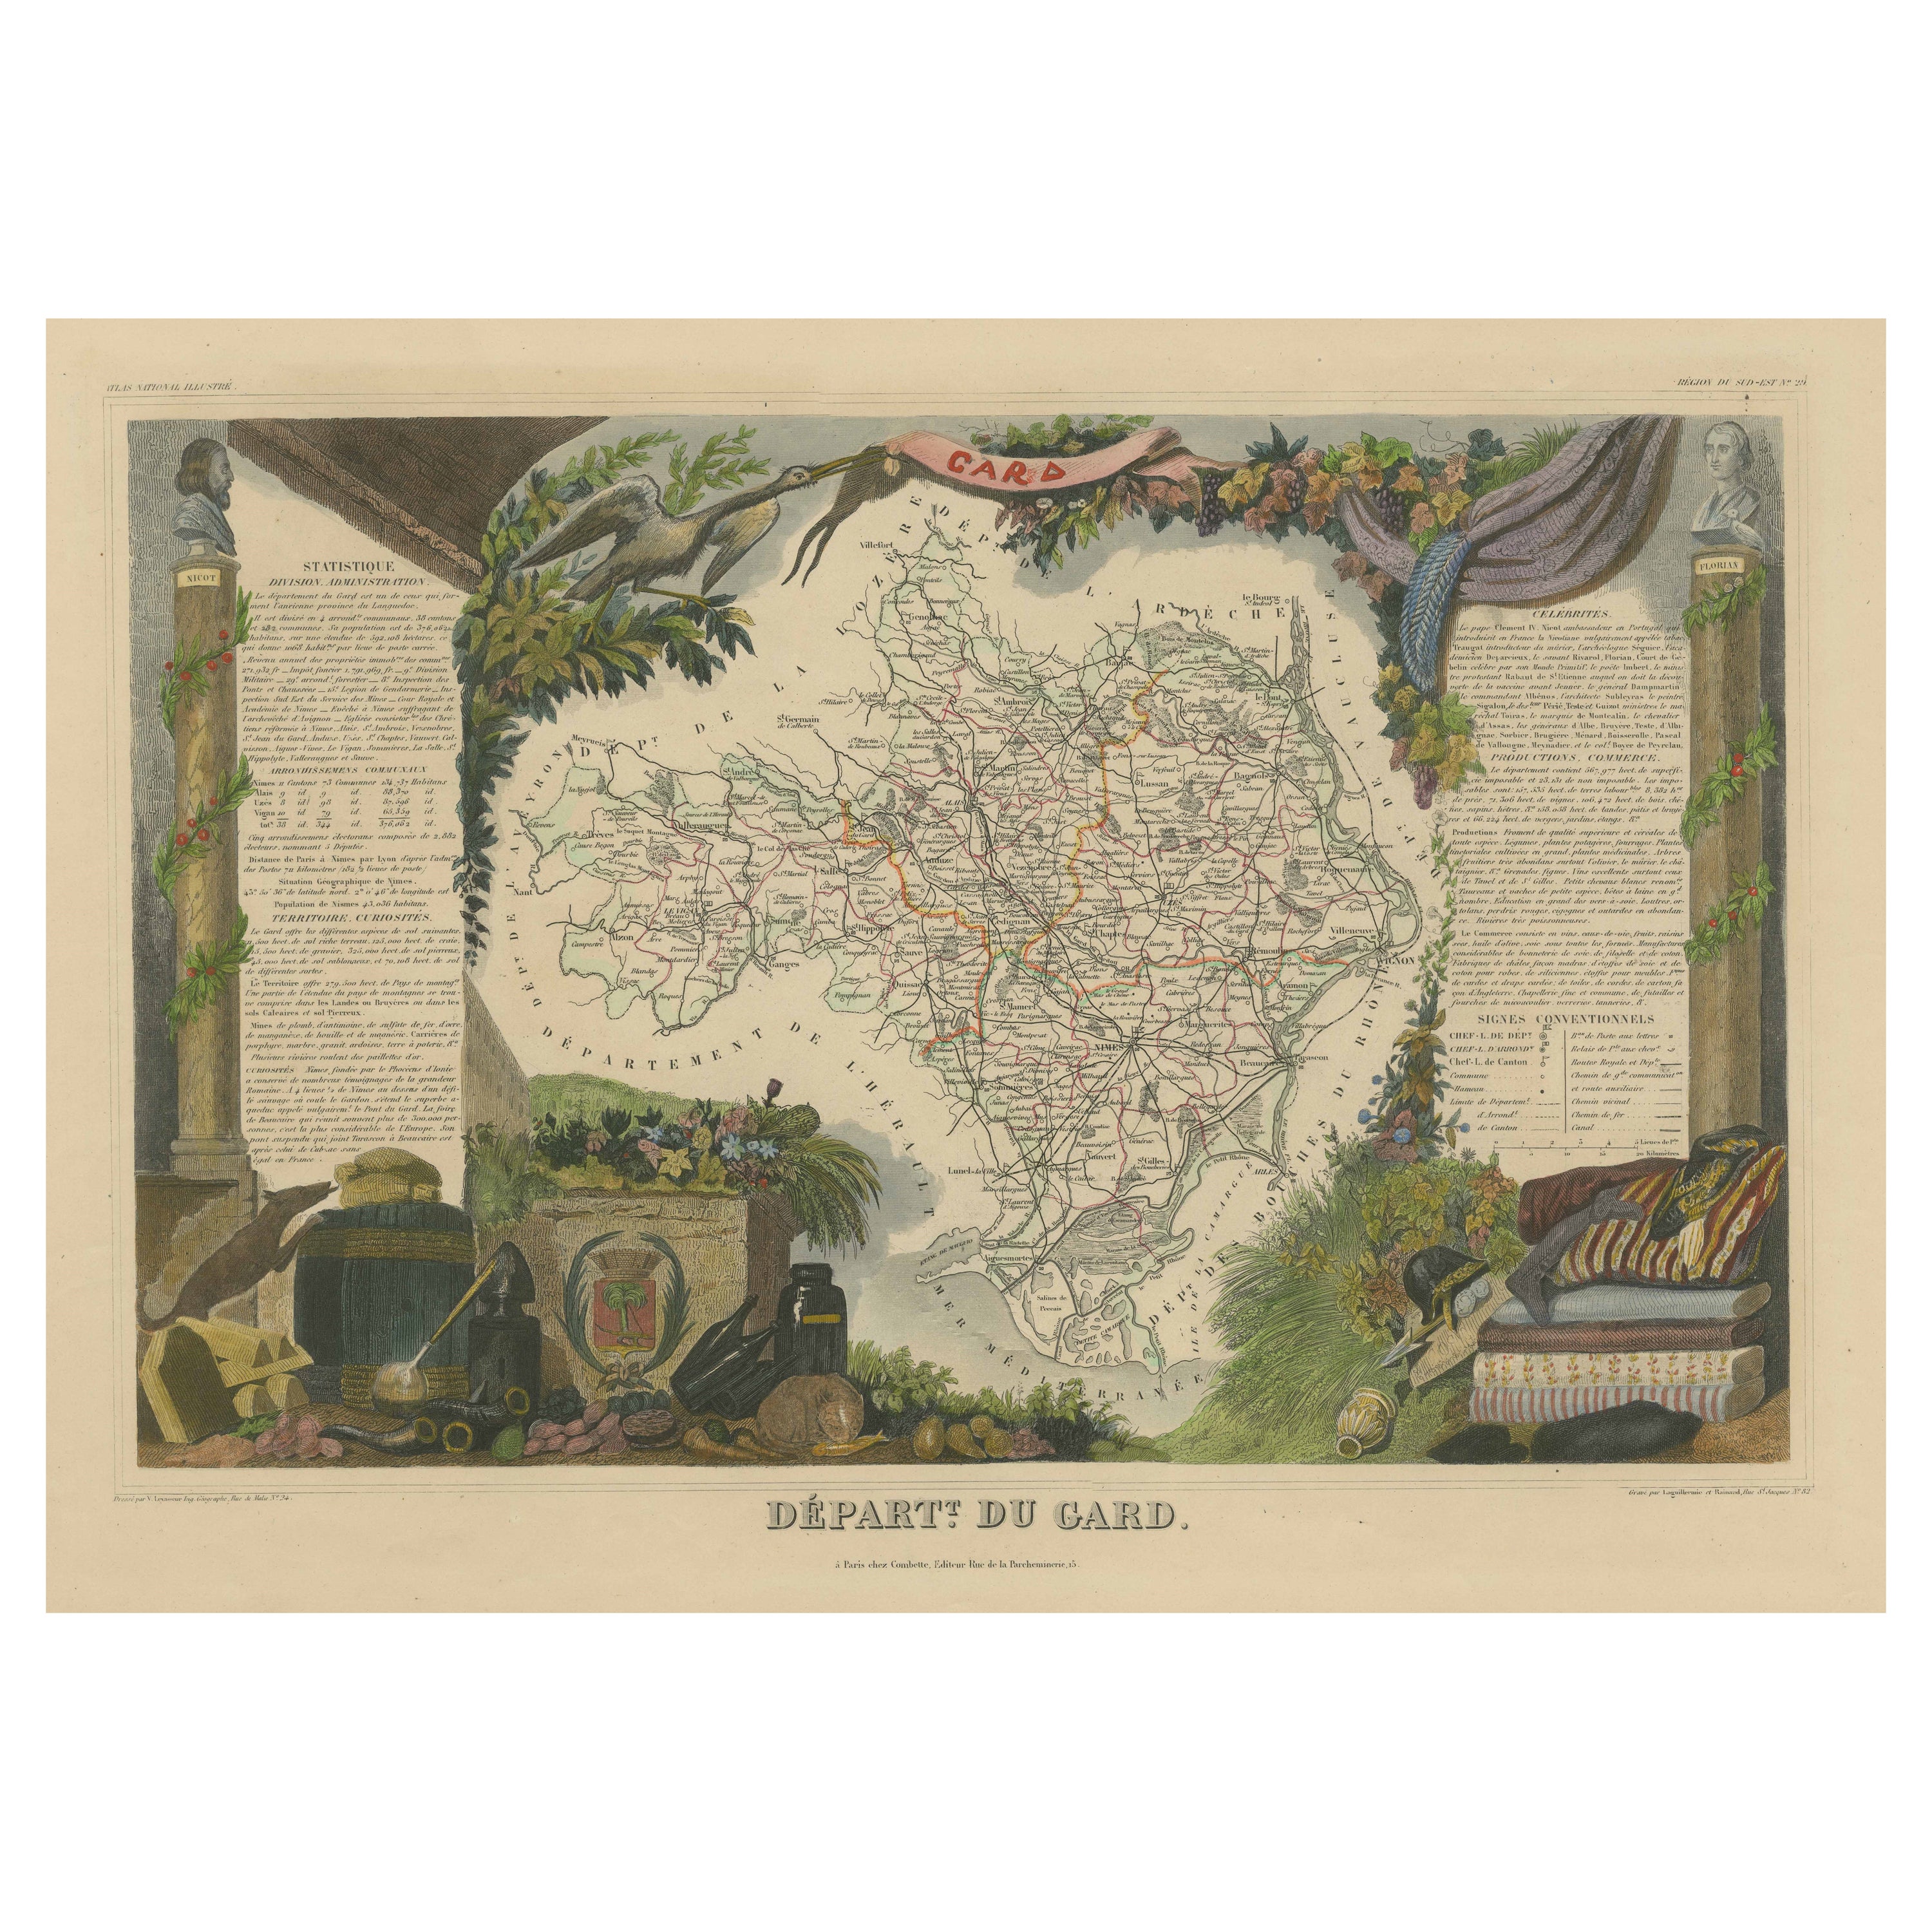 Hand Colored Antique Map of the Department of Gard, France For Sale